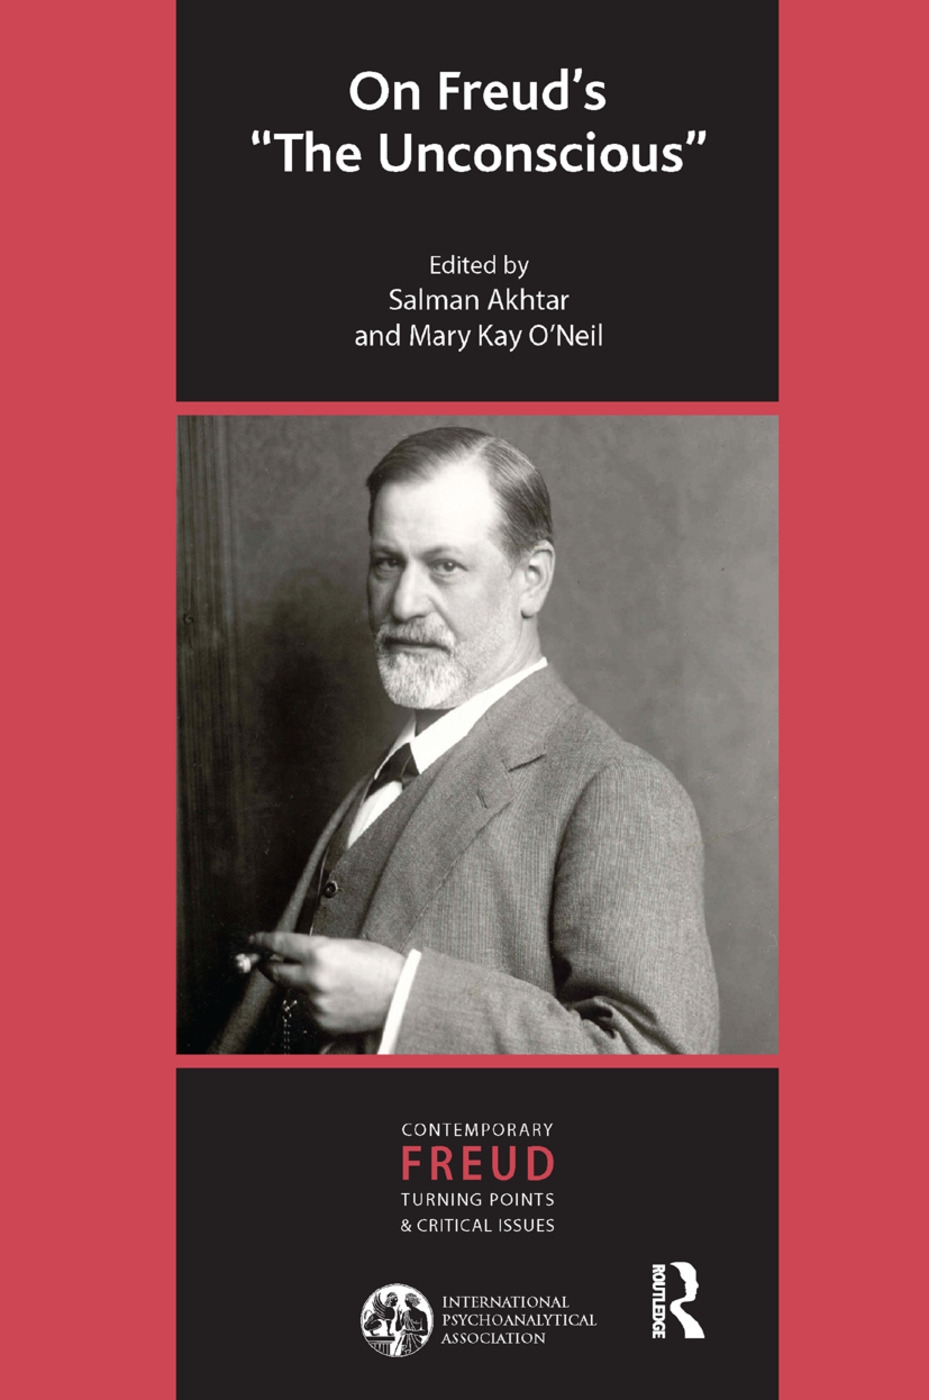 On Freud’s The Unconscious